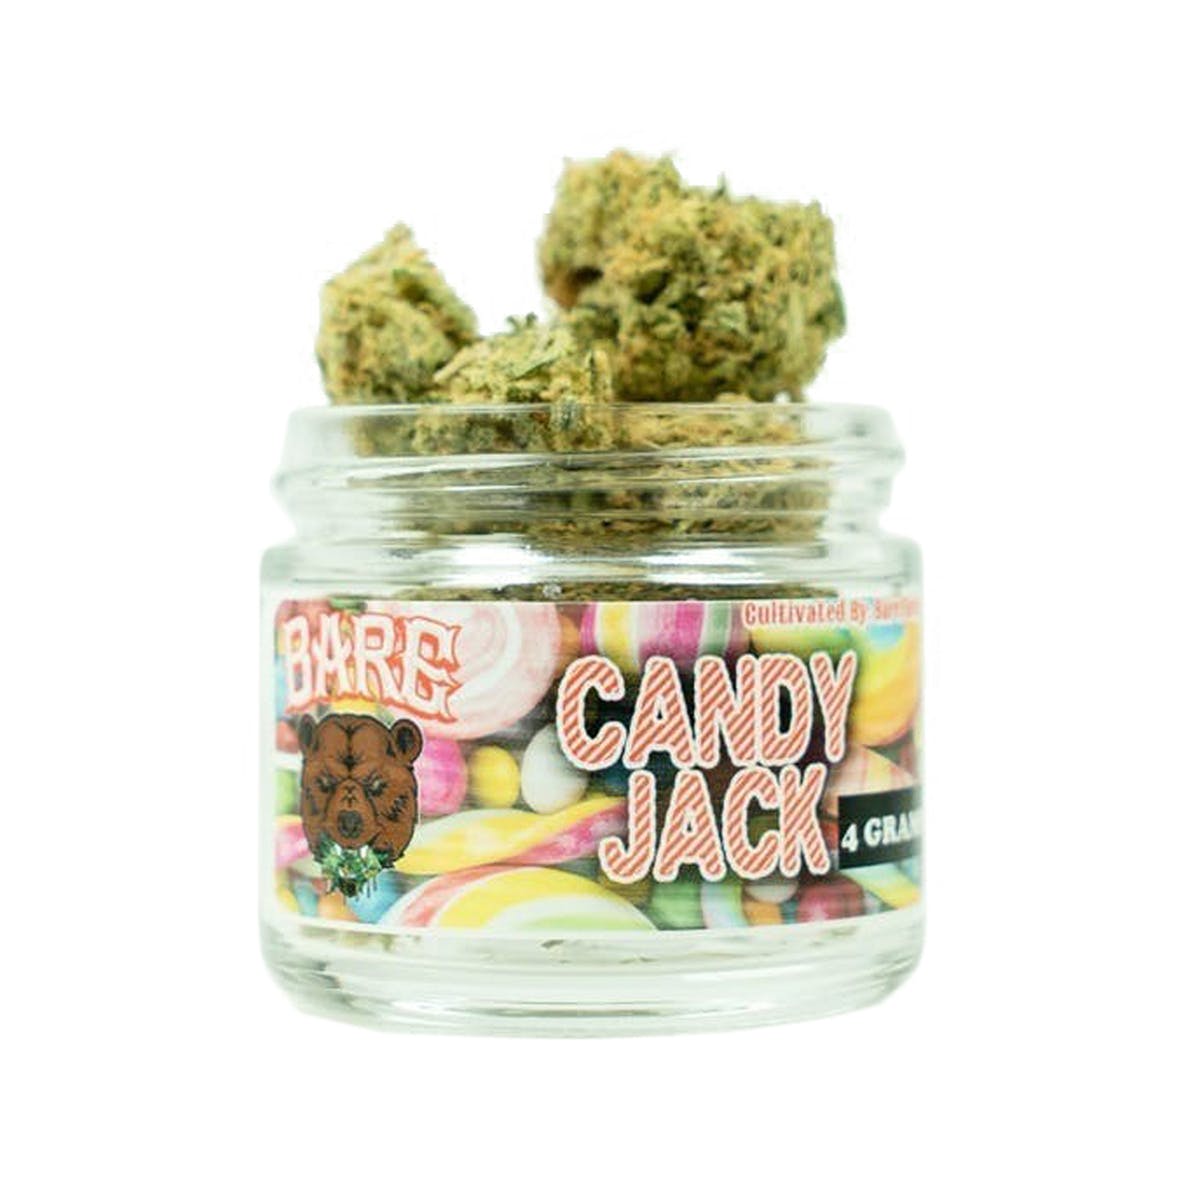 Bare Farms - Candy Jack